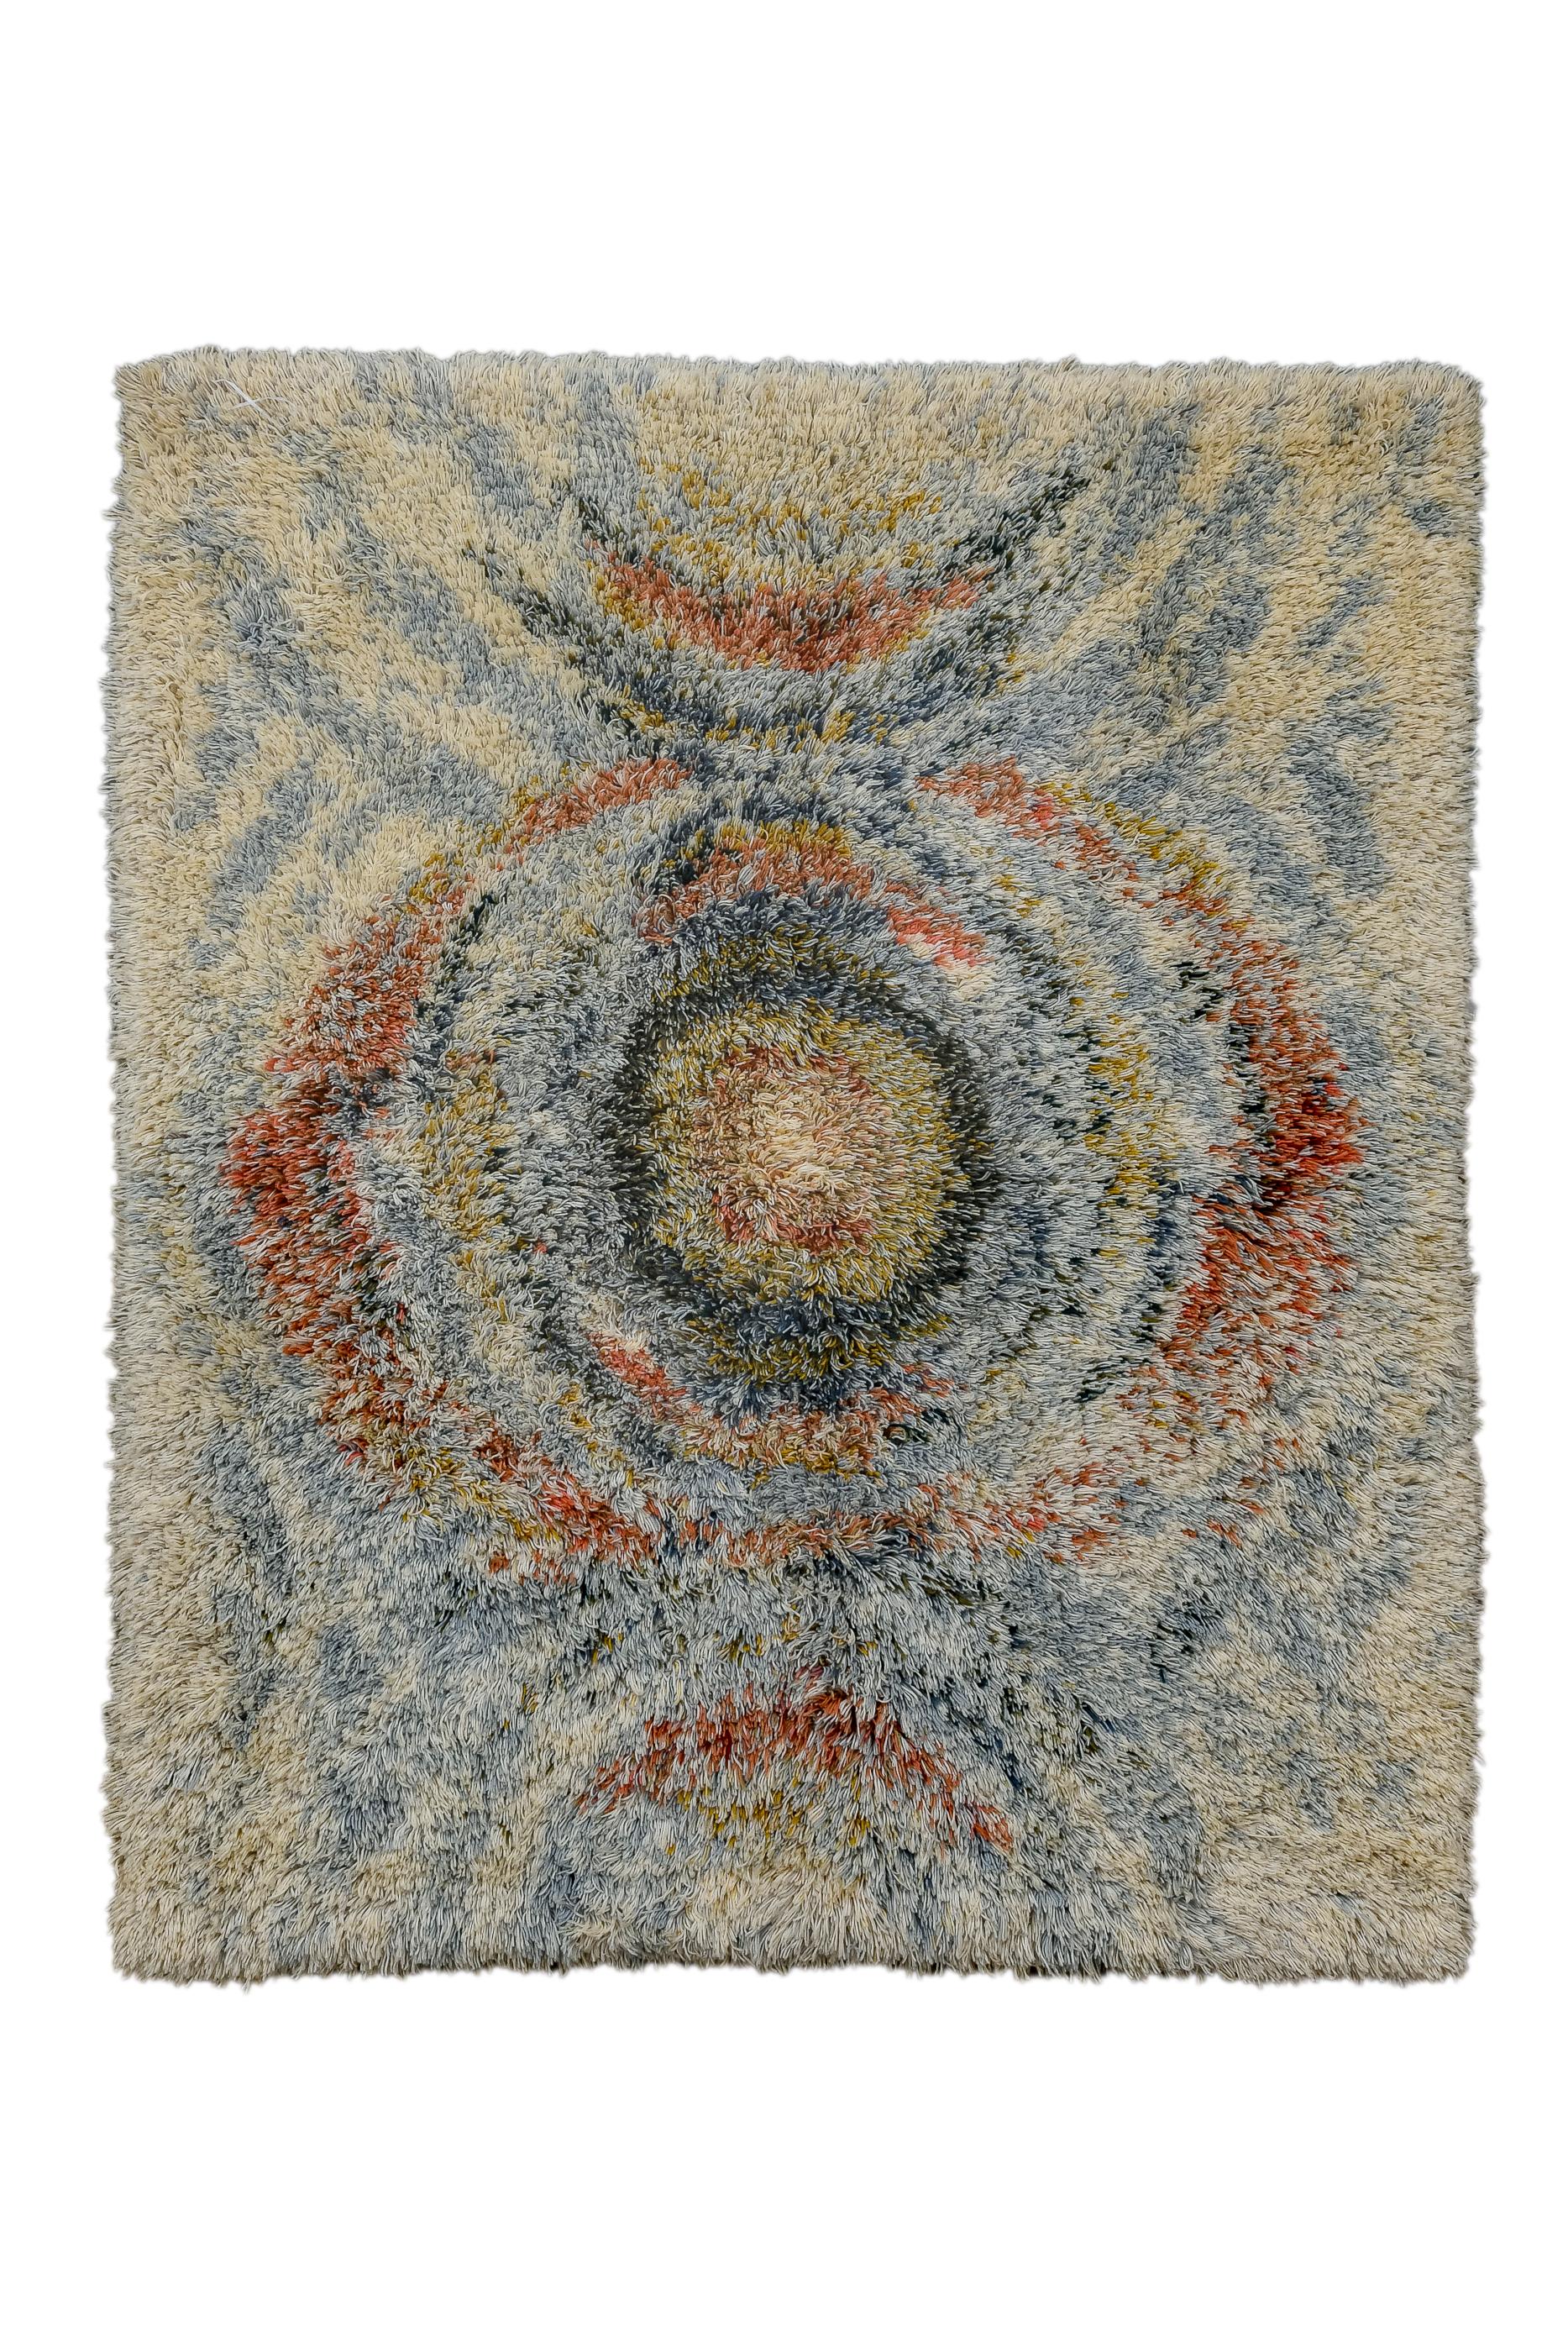 This exceptionally, shaggy long pile scatter shows a full and two upper and lower flanking halves, in a rough, concentric round manner, with swirls of red, straw, blue and beige. The central element seems to pulsate. A great rug for the coldest